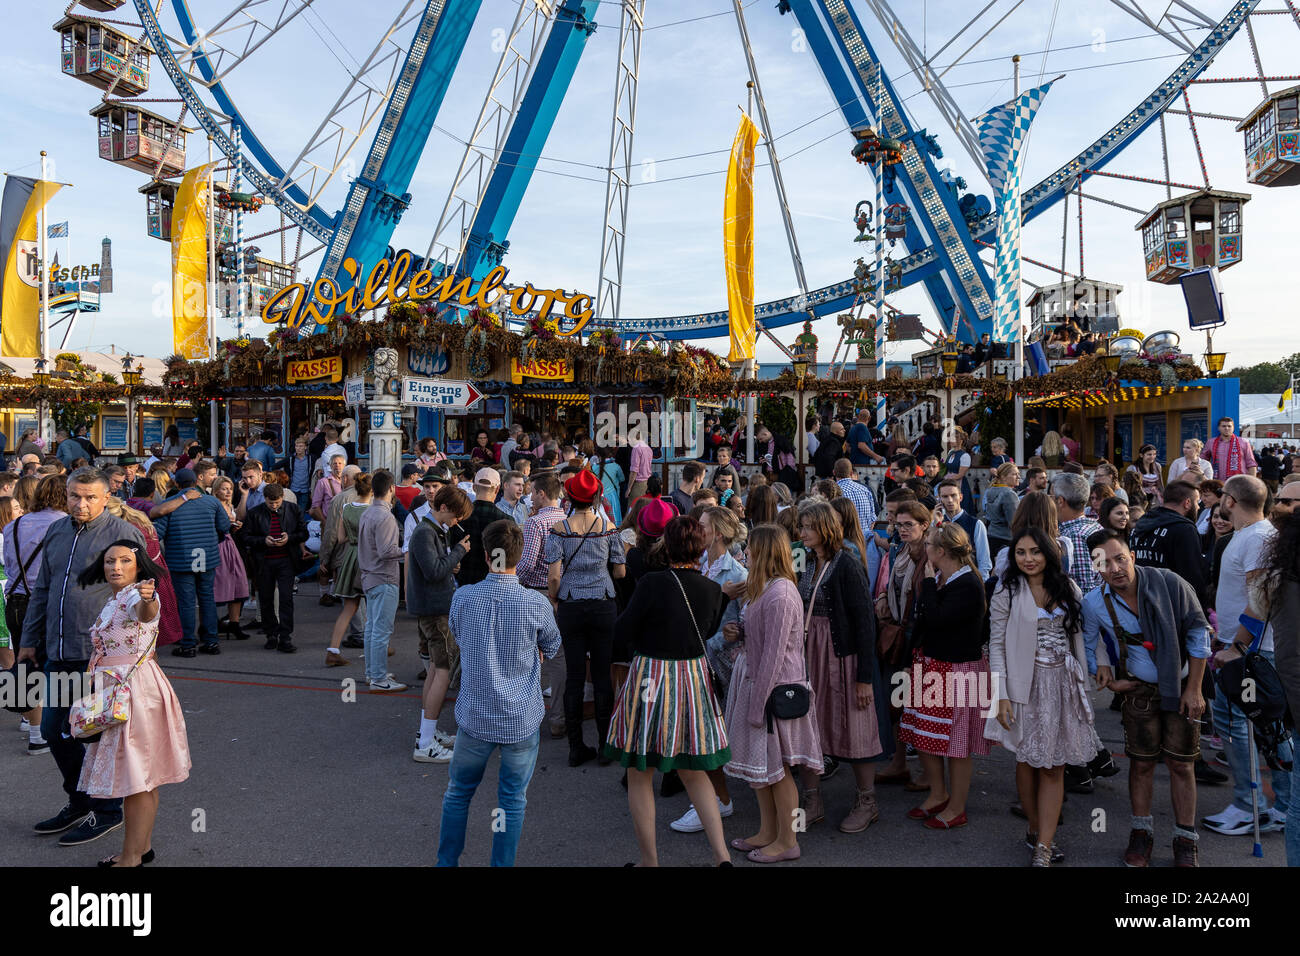 Munich, Germany - 2019, September 19: people from all over the world walking in front of the rotating ferris wheel at the Oktoberfest in Munich Stock Photo